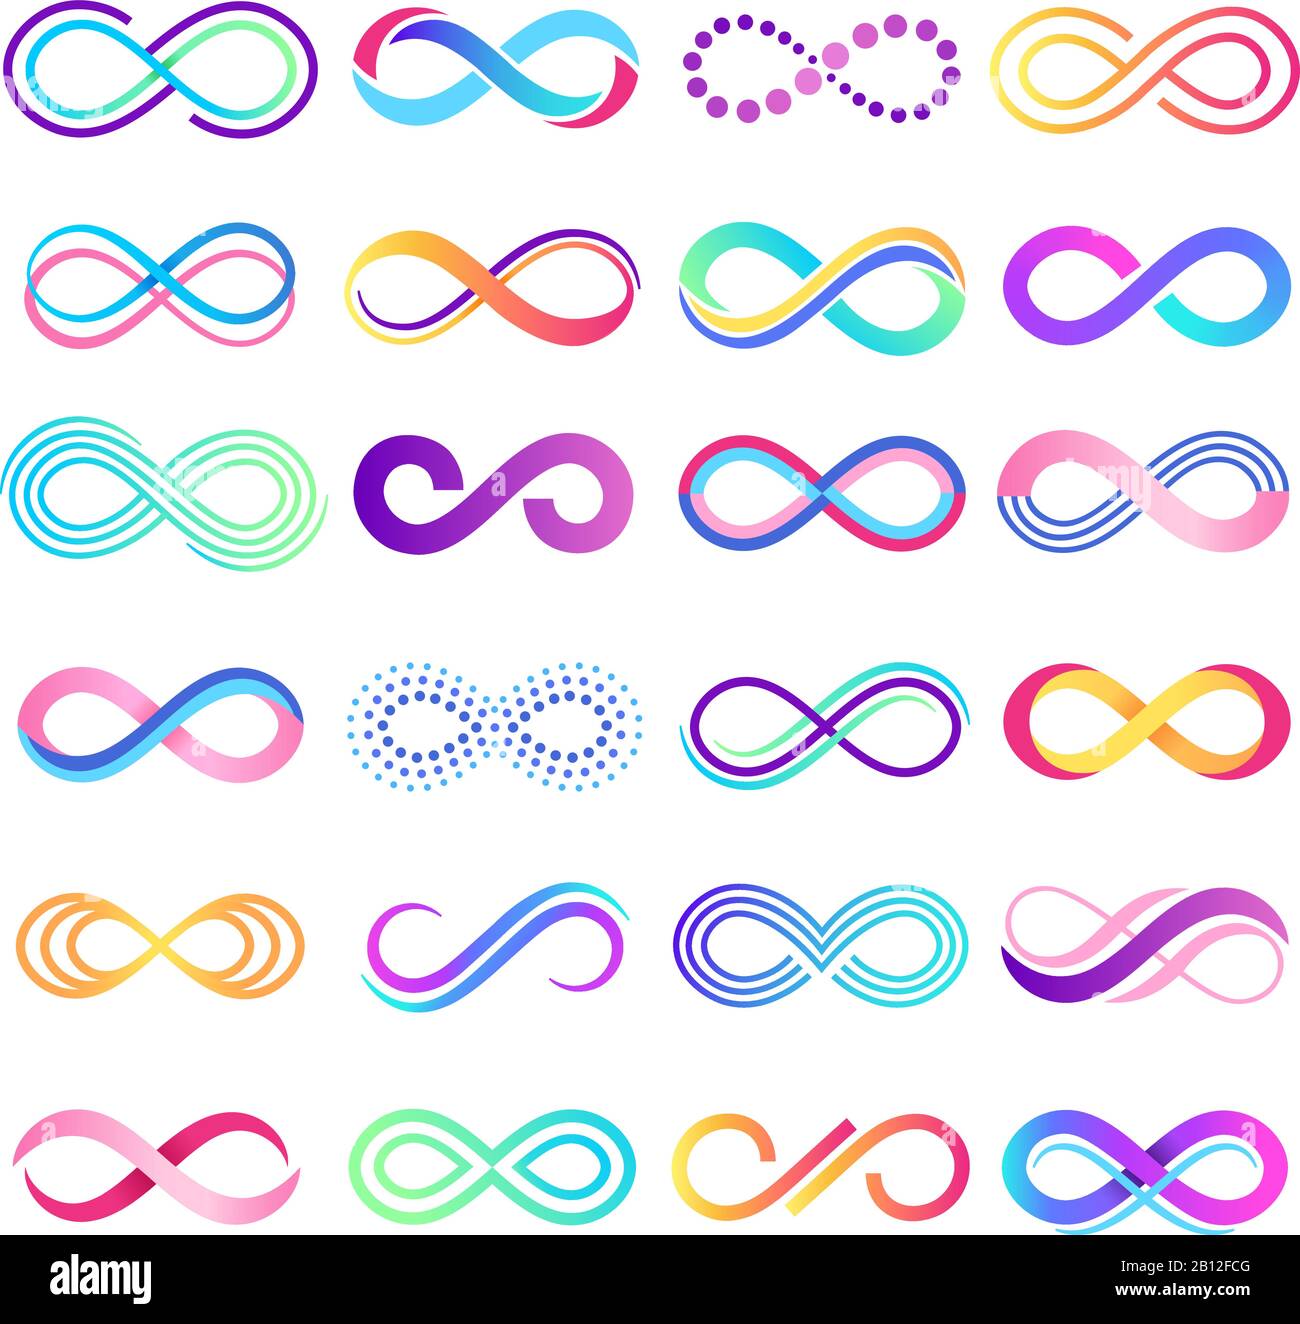 Download Pics Of Infinity Signs Nomer 7